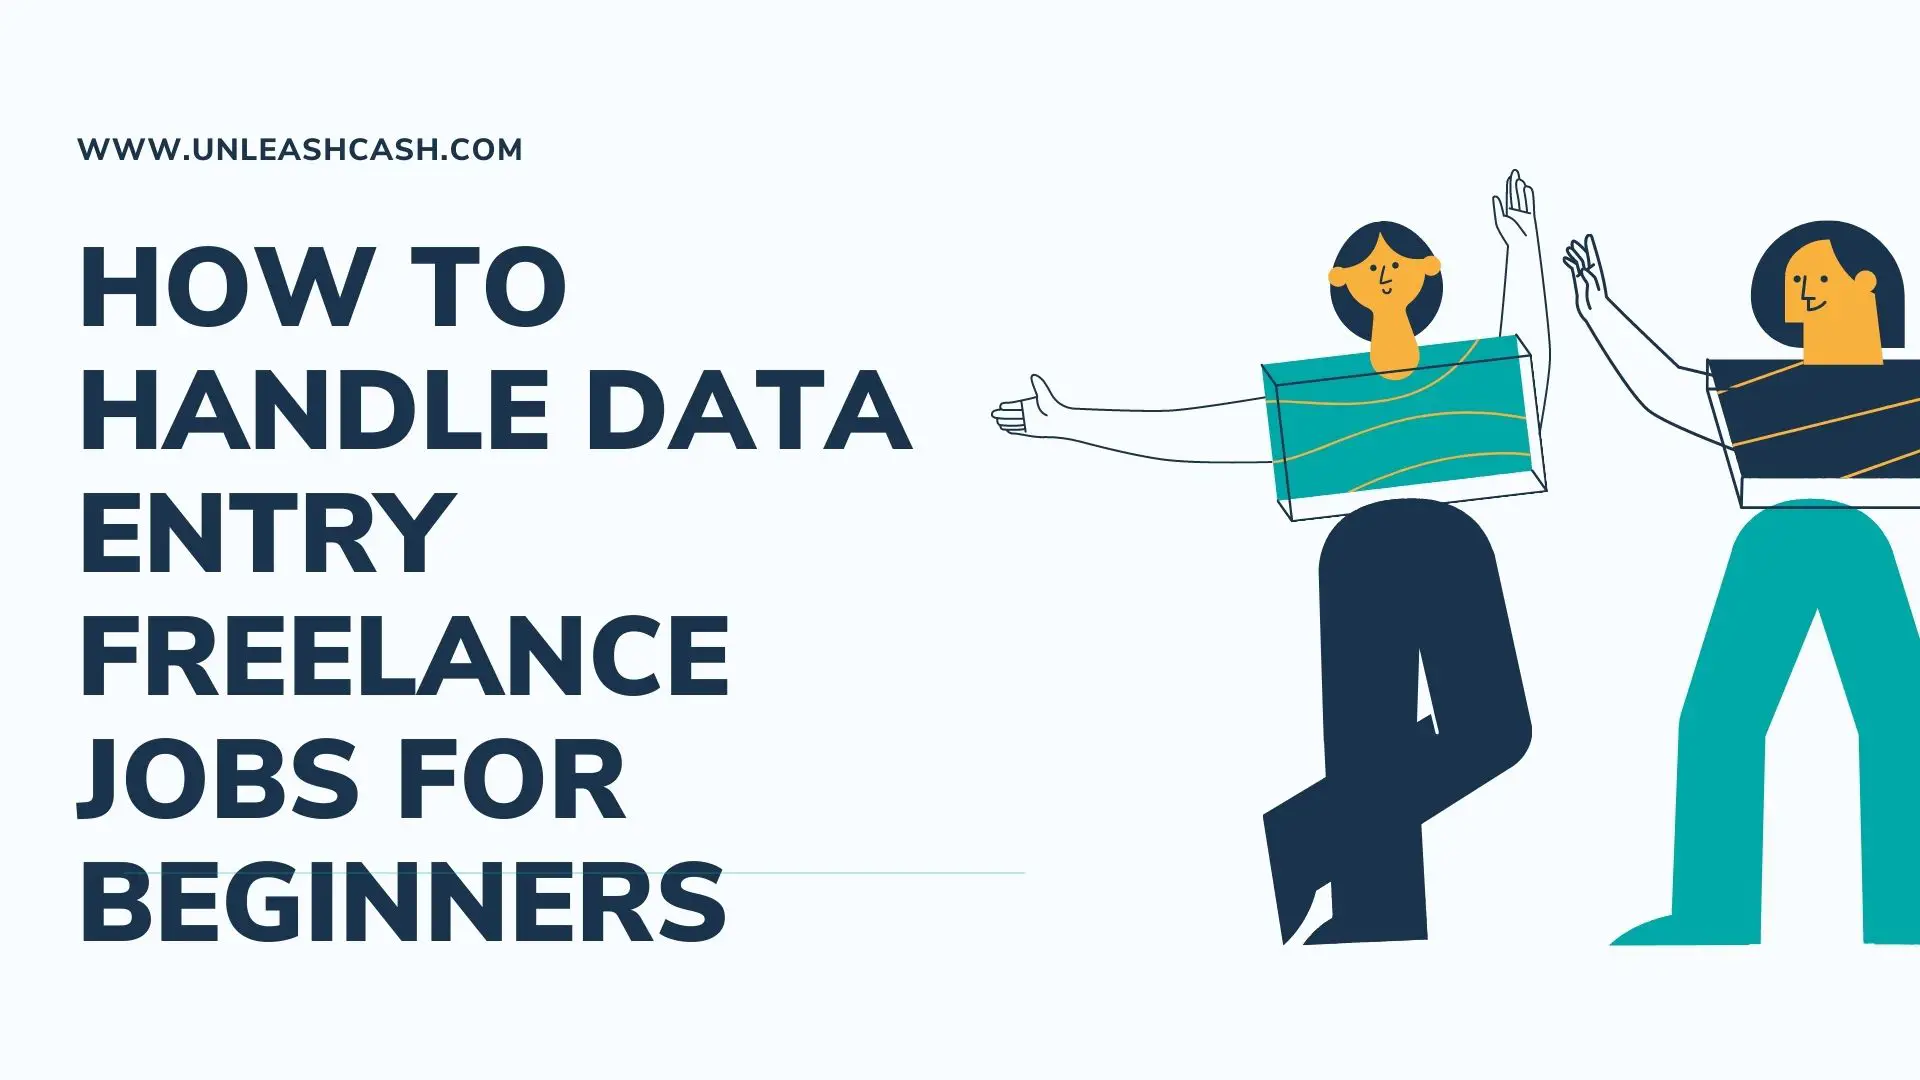 How To Handle Data Entry Freelance Jobs For Beginners